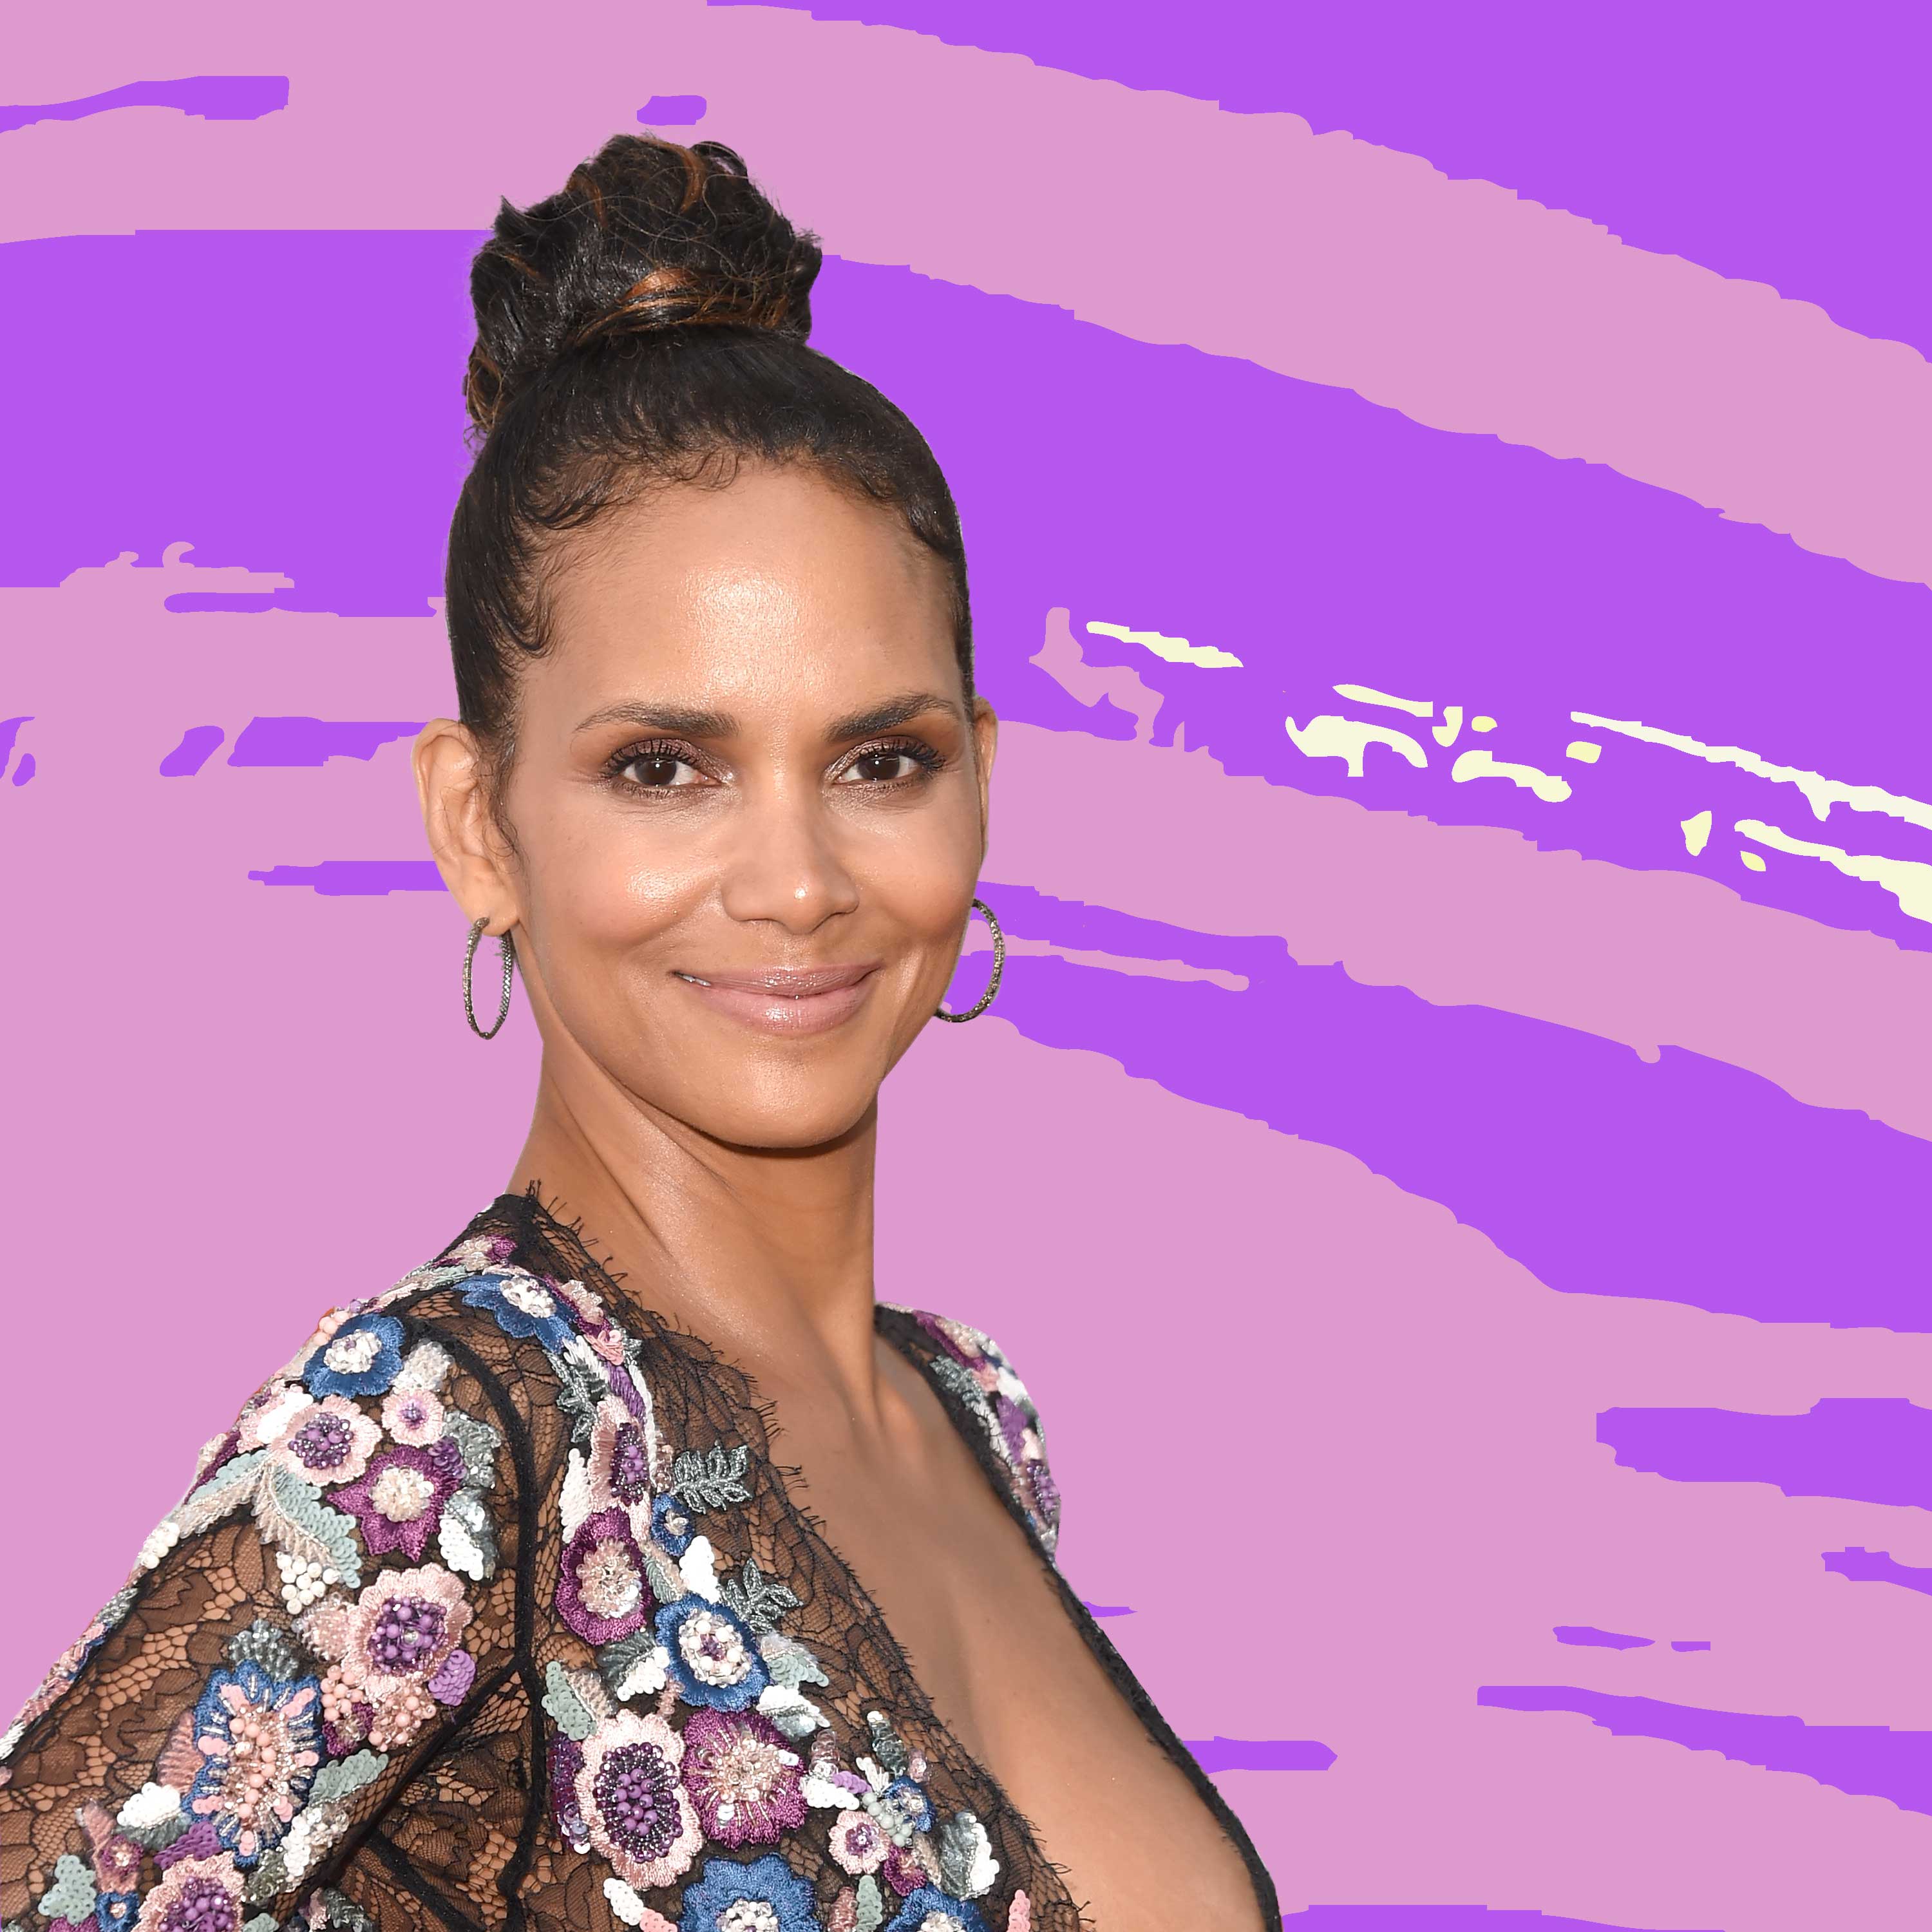 You Need A 360 View of Halle Berry’s Latest Hairstyle